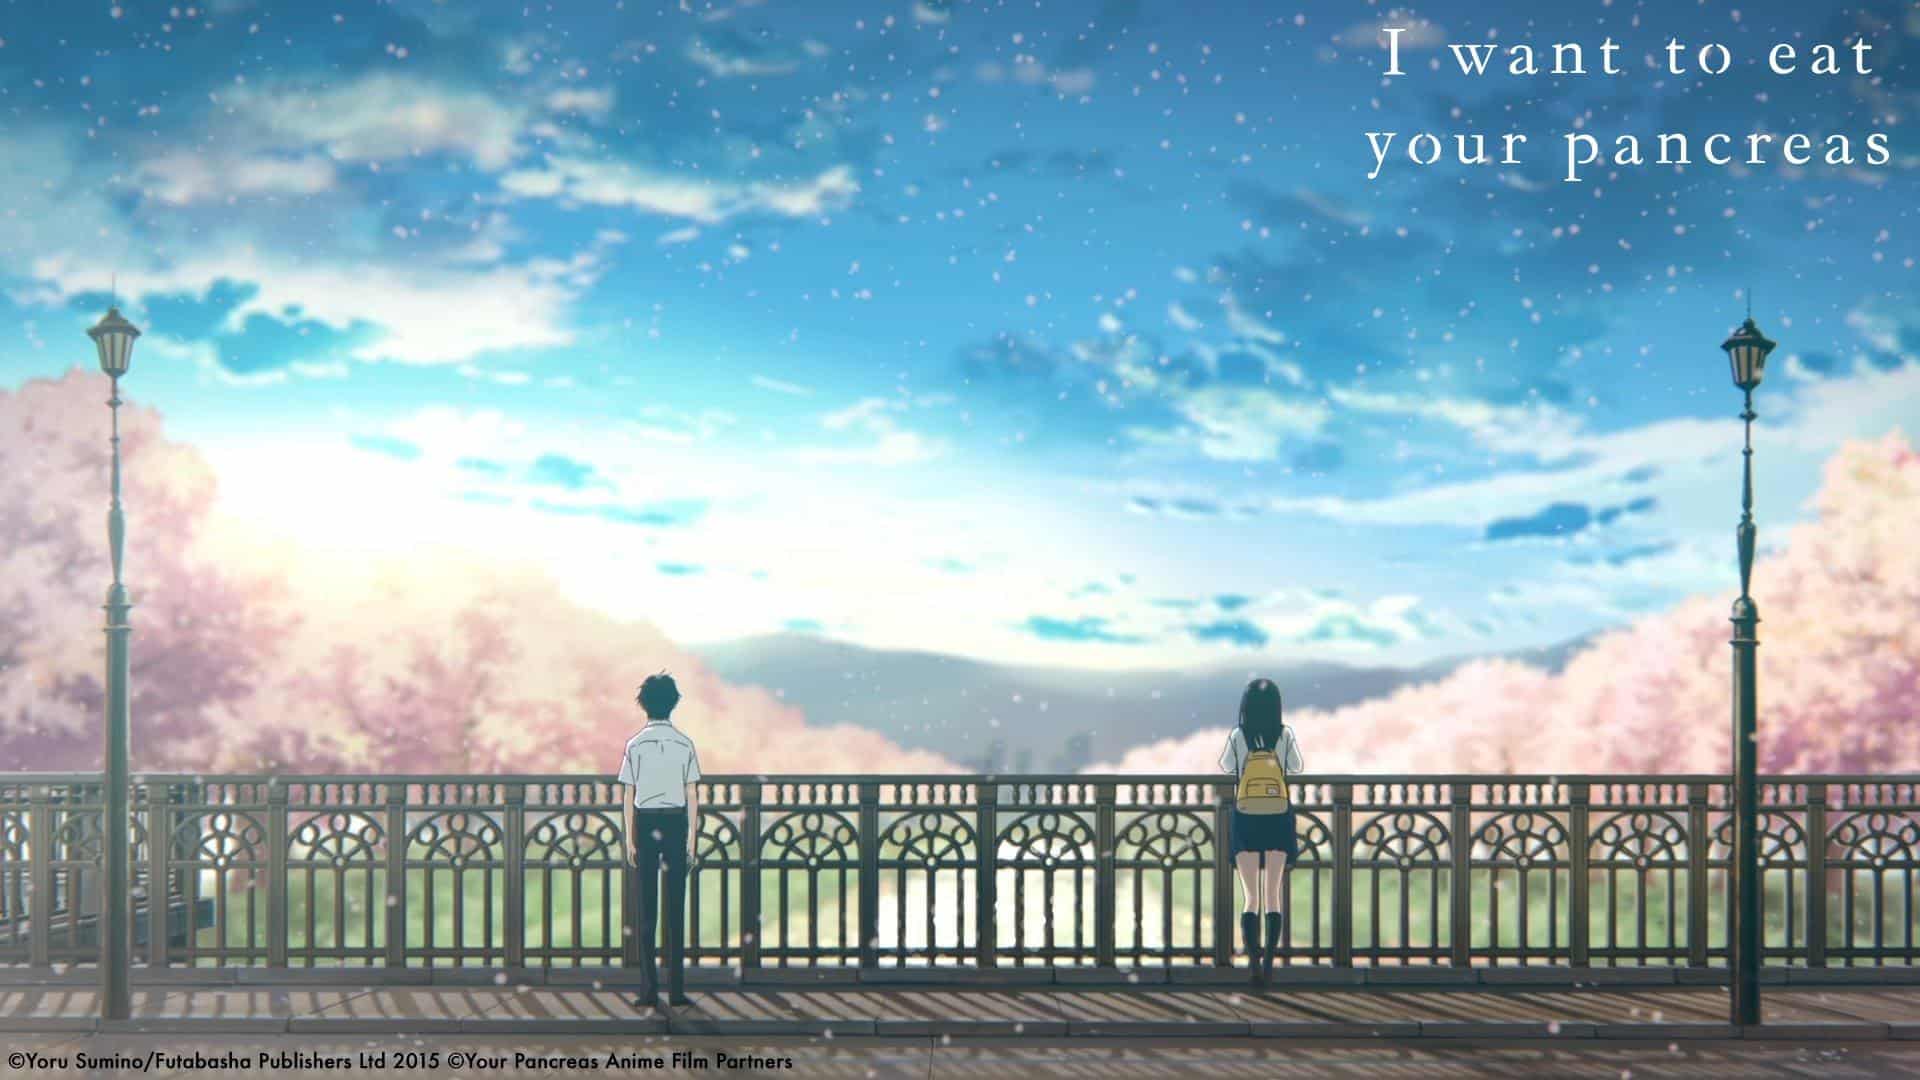 I Want to Eat Your Pancreas HD Wallpaper